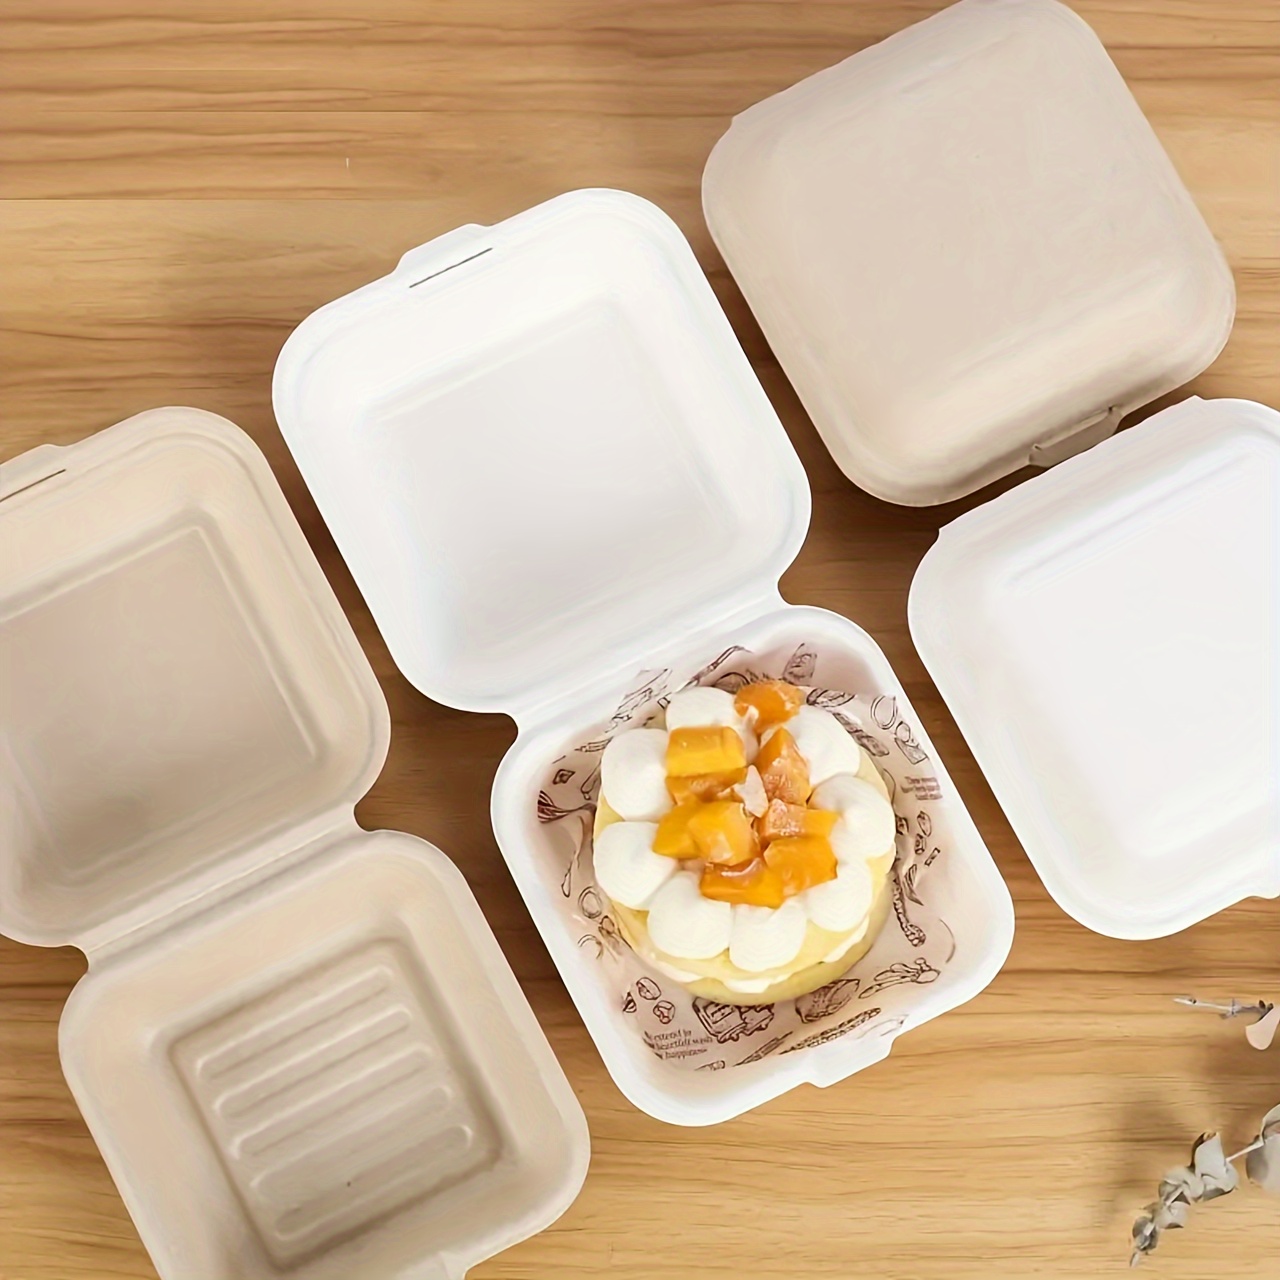 Buy Good Quality Bio-Degradable Food & Lunch Box Containers